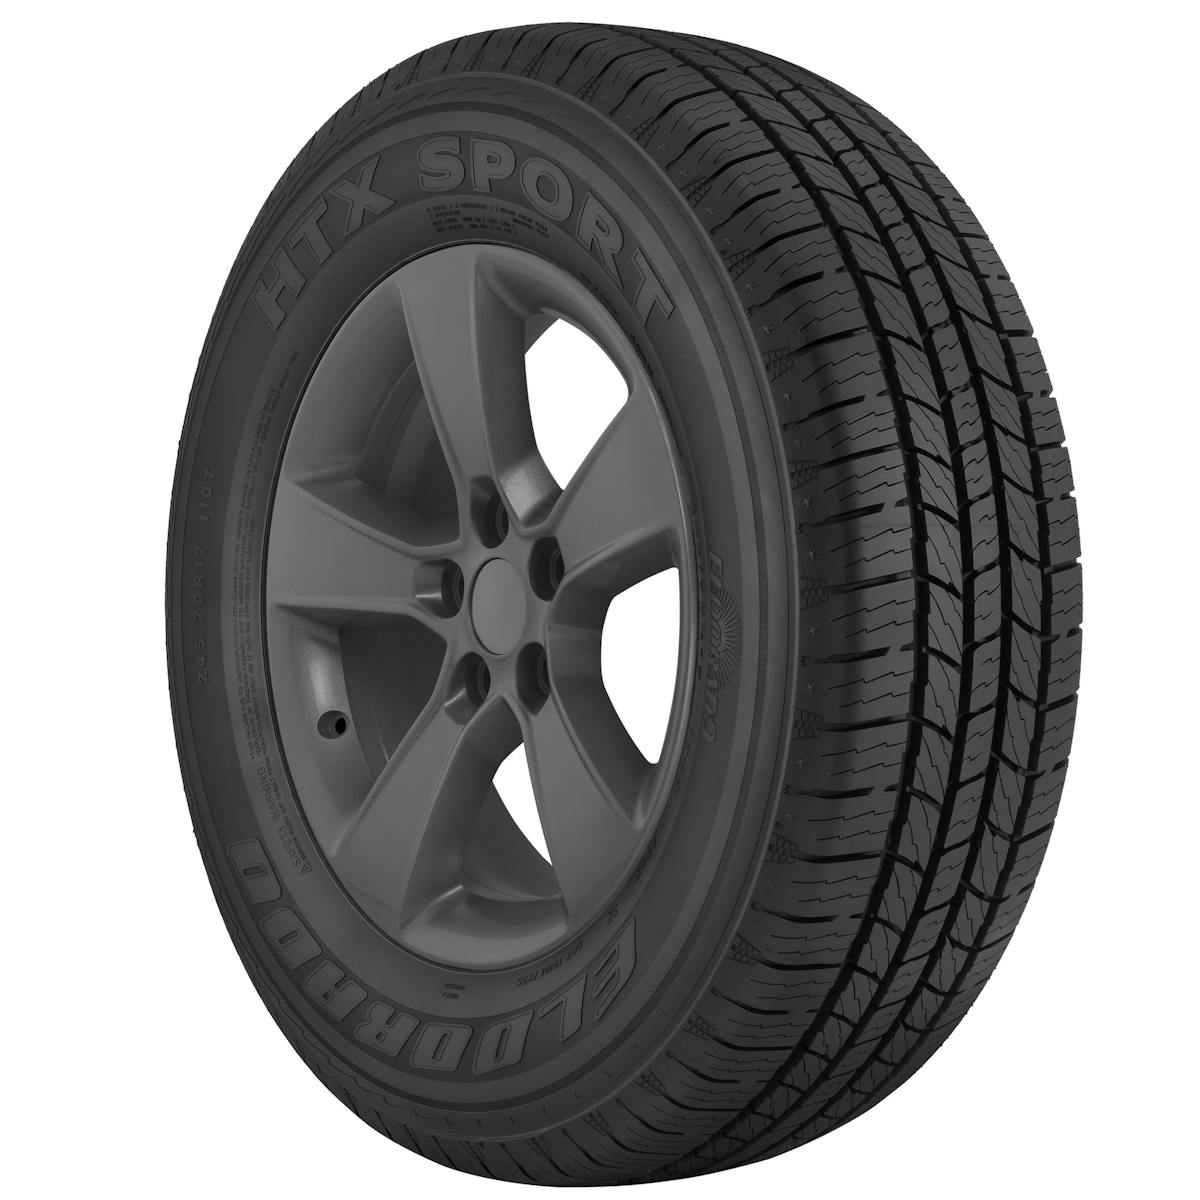 tbc-brands-targets-lt-tire-market-with-4-new-products